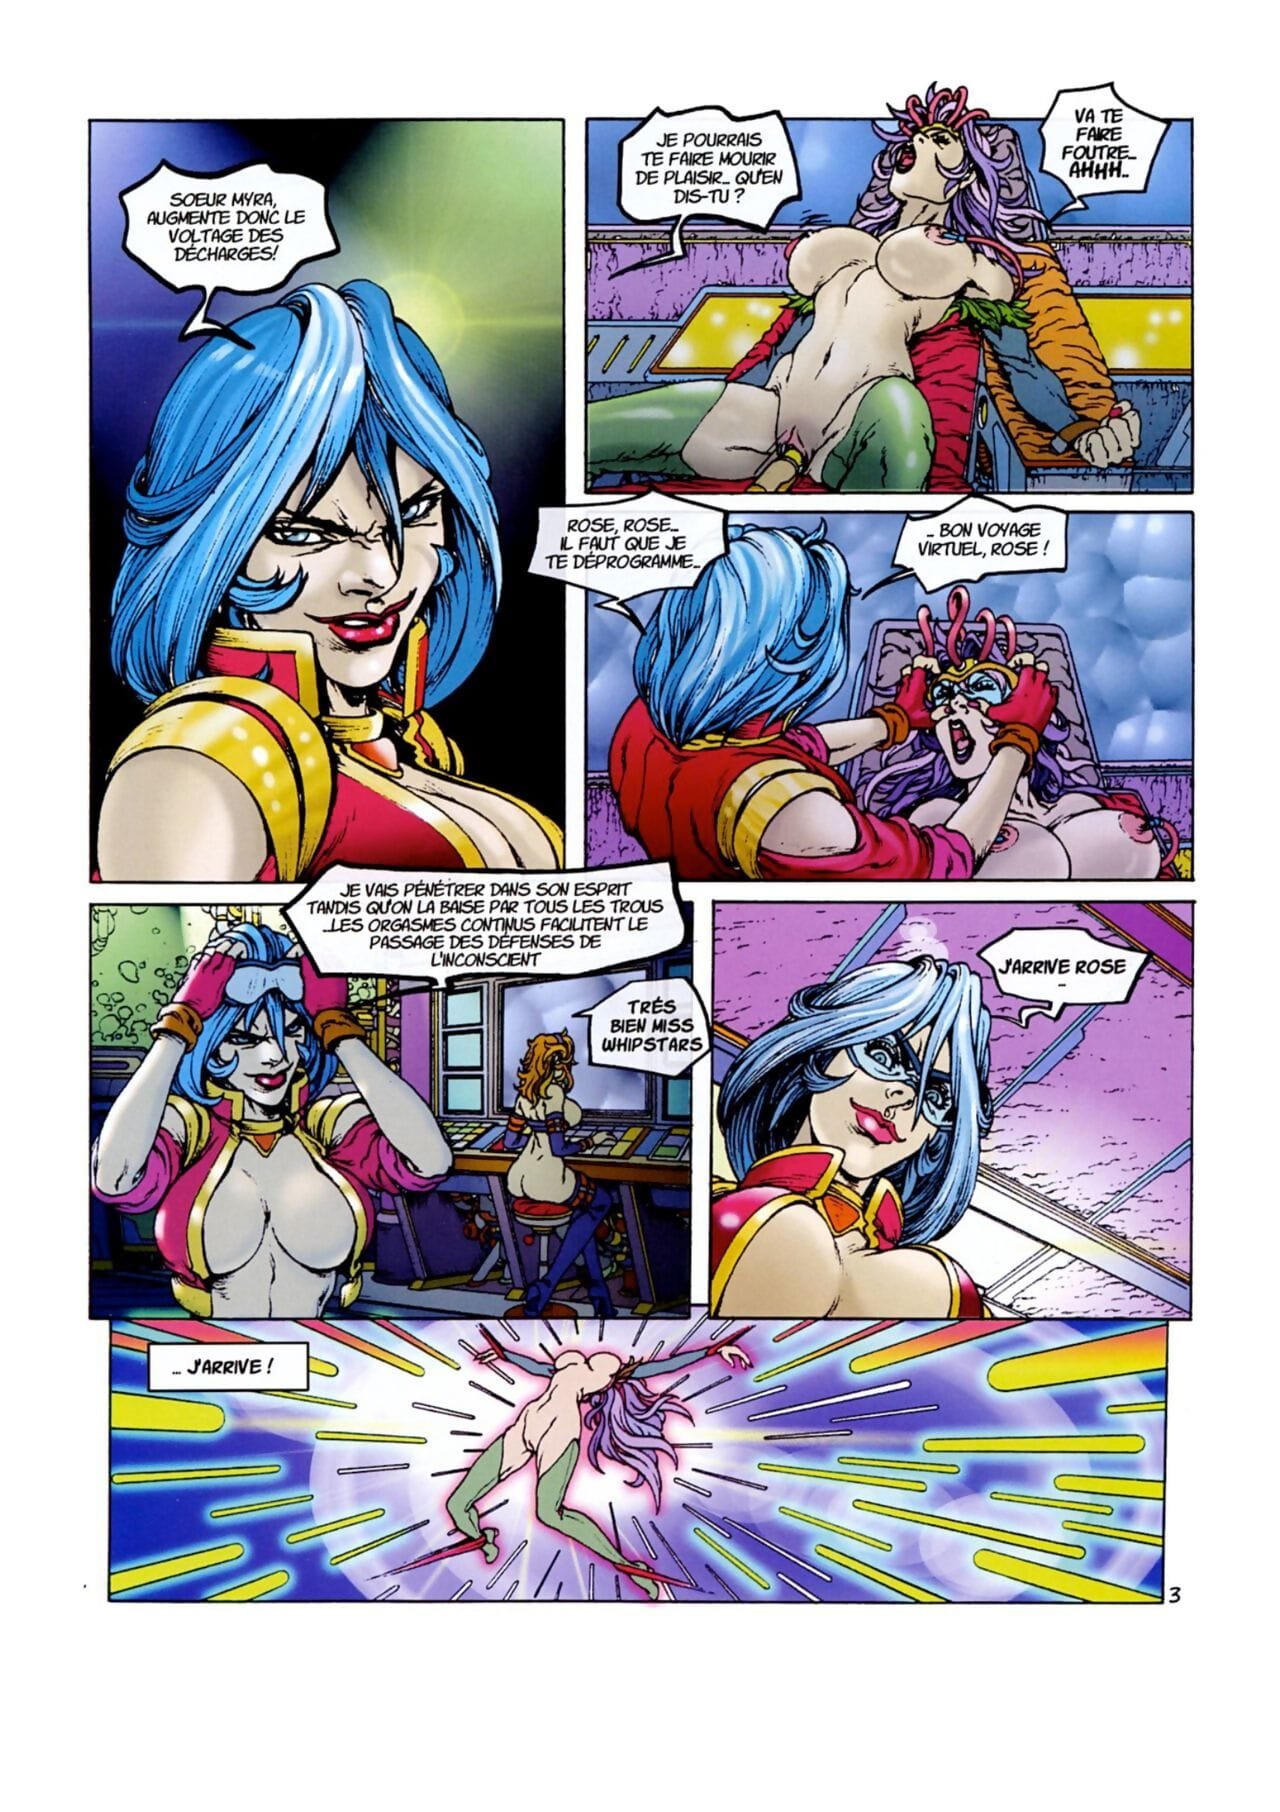 Sexy cyborg - part 2 page 1